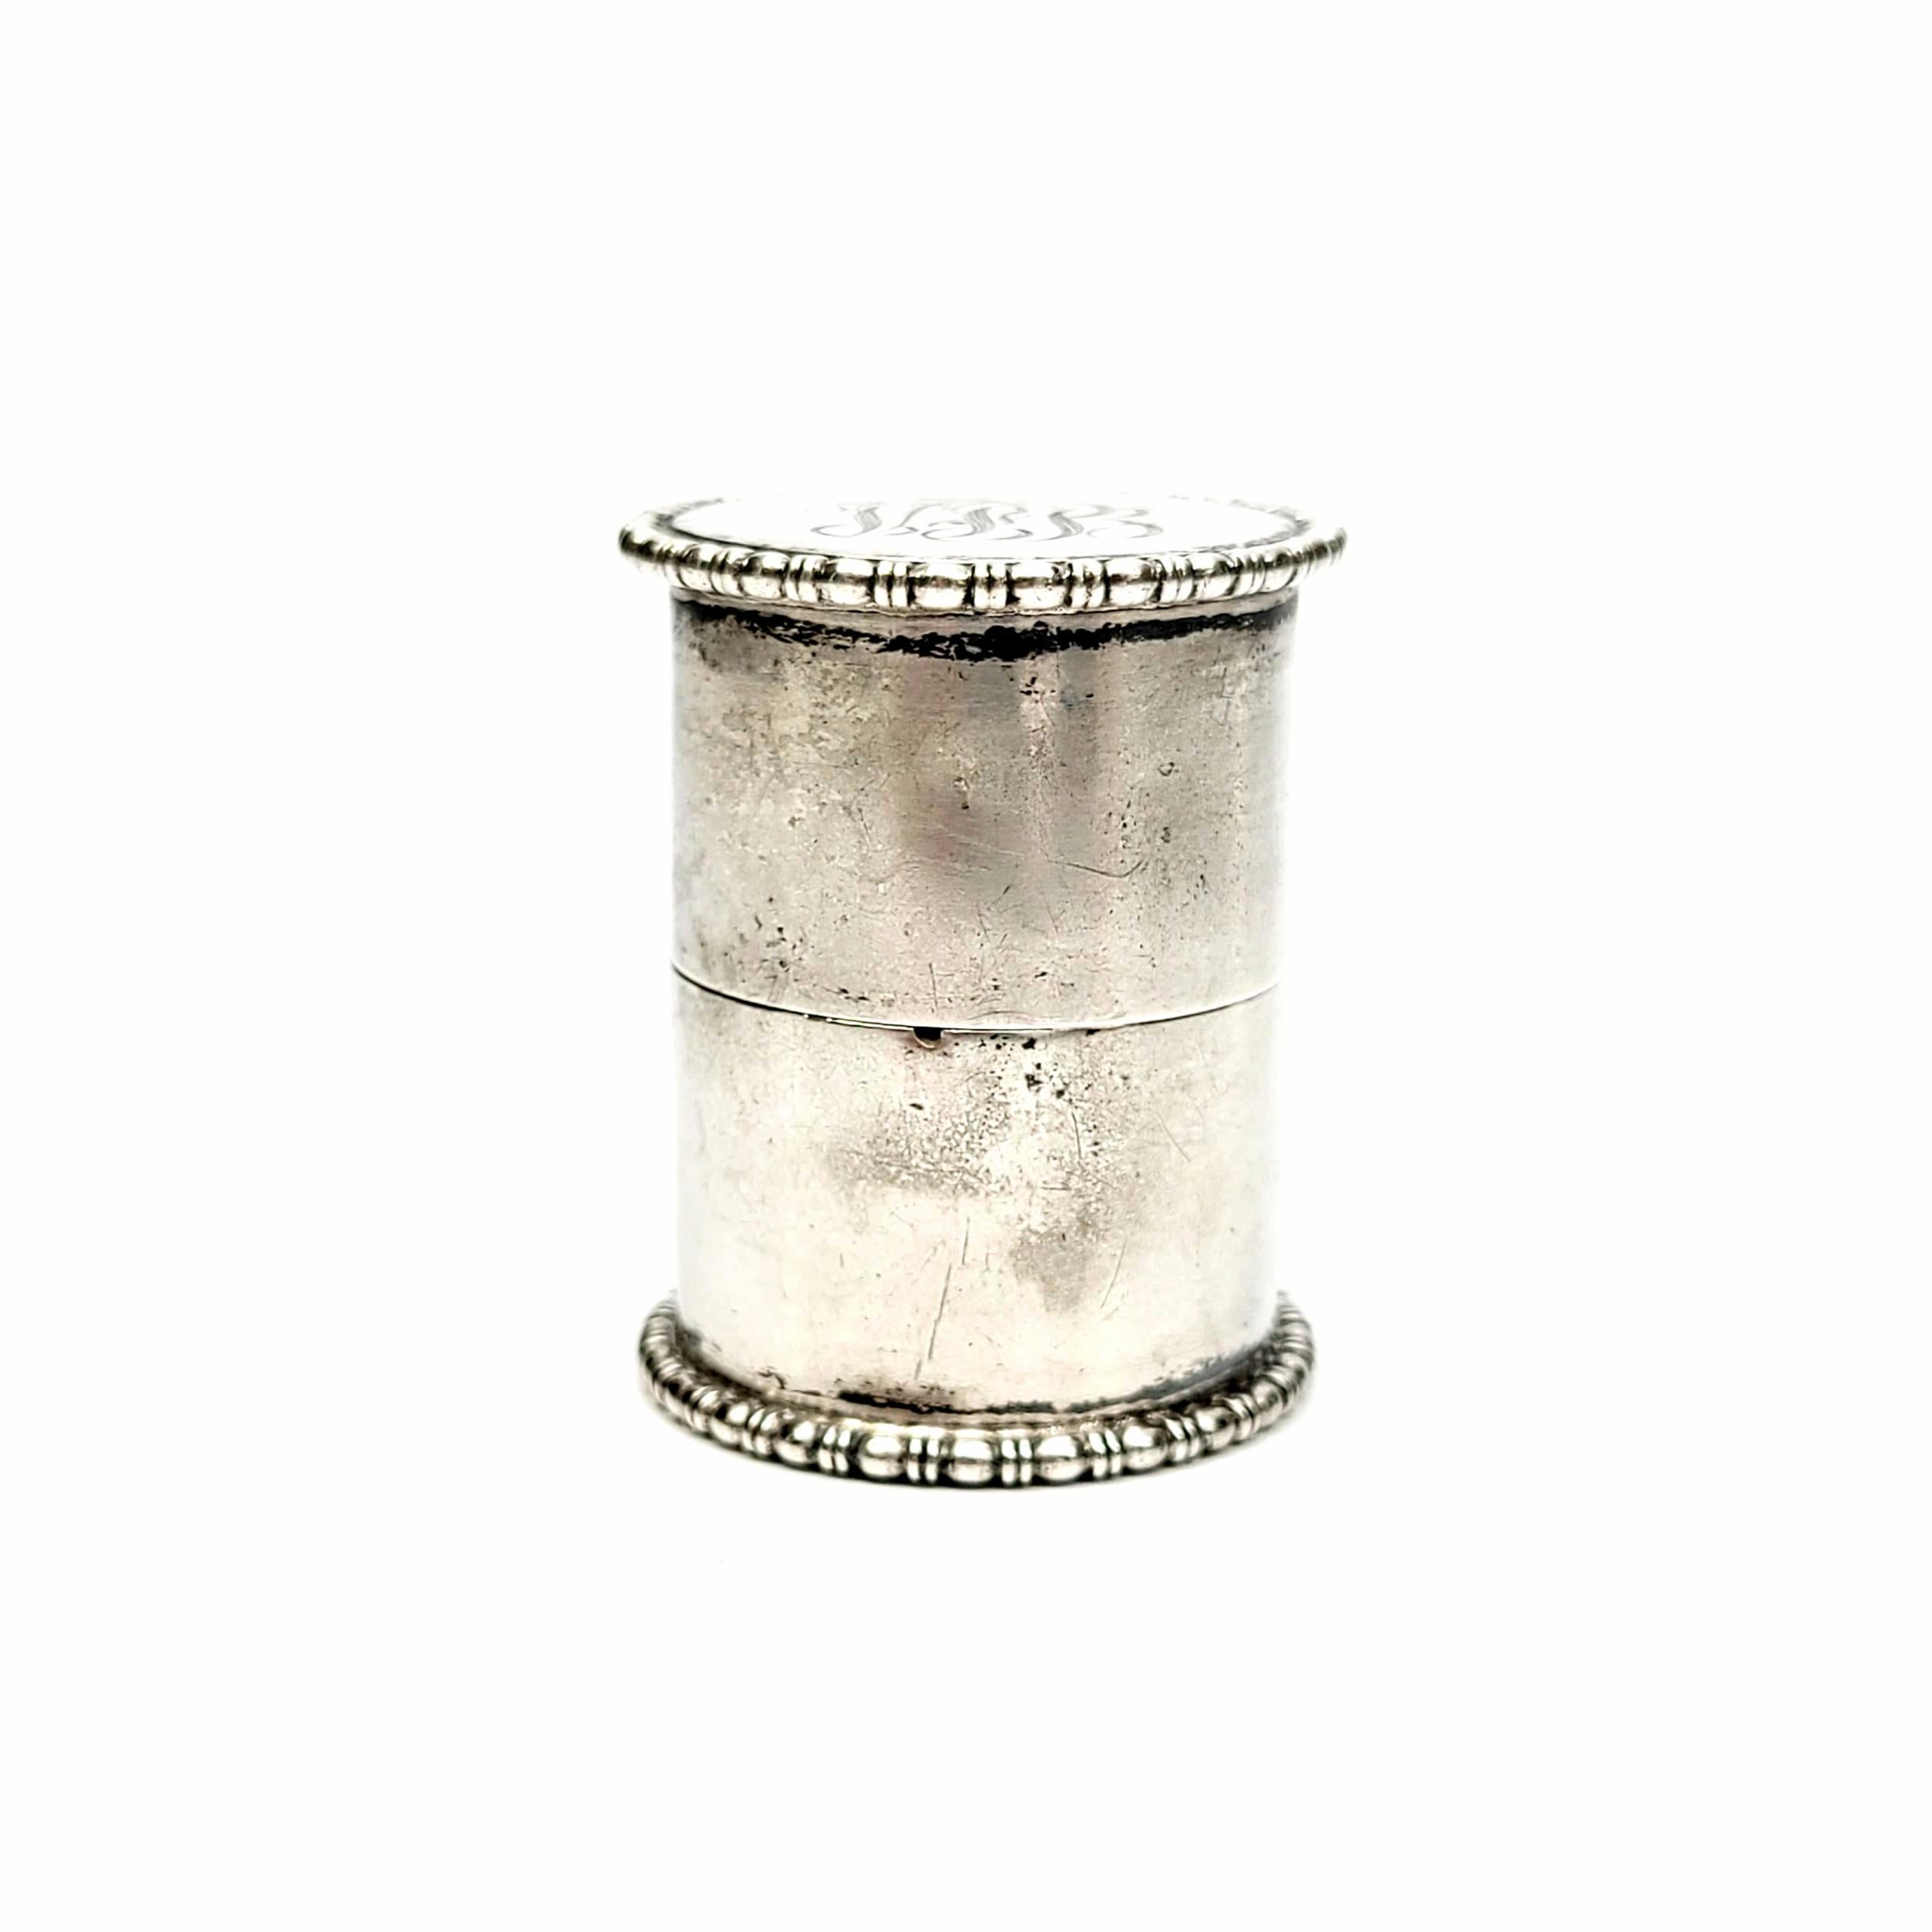 Antique sterling silver round canister to hold thread.

This thread holder features a simple beaded design along the top and bottom. Monogram on the top.

Monogram appears to be VPB.

Measures 1 1/2